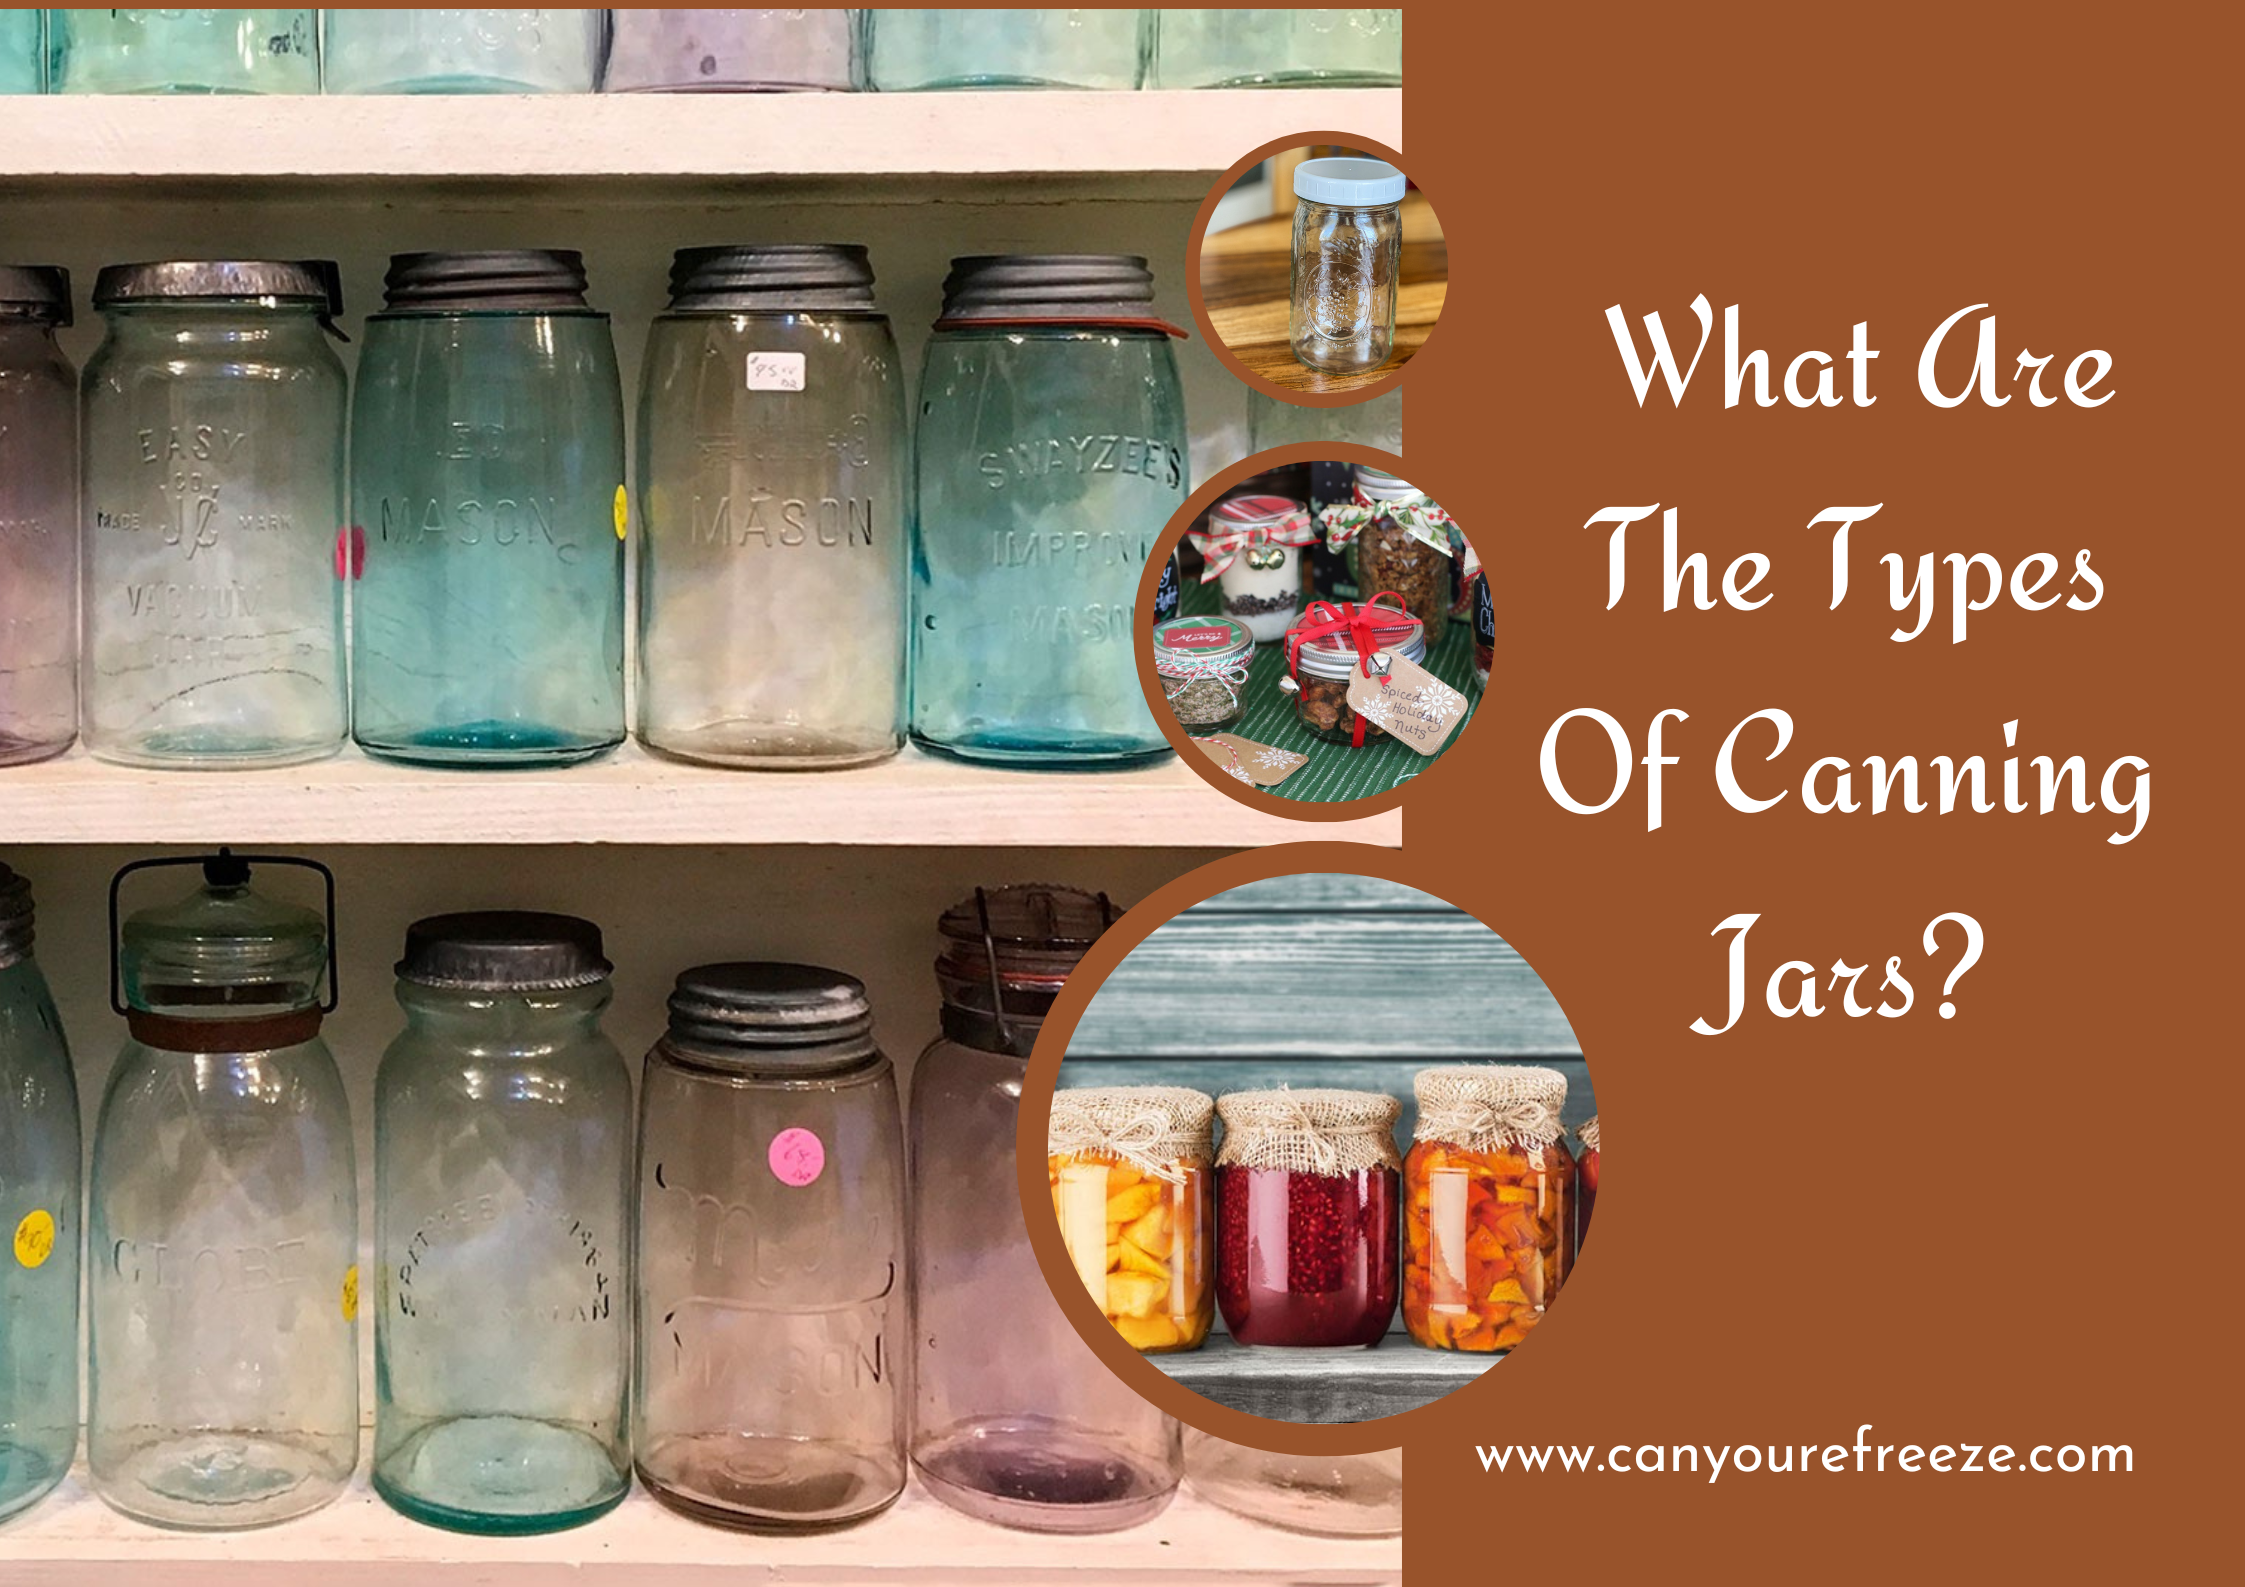 What Are The Types Of Canning Jars